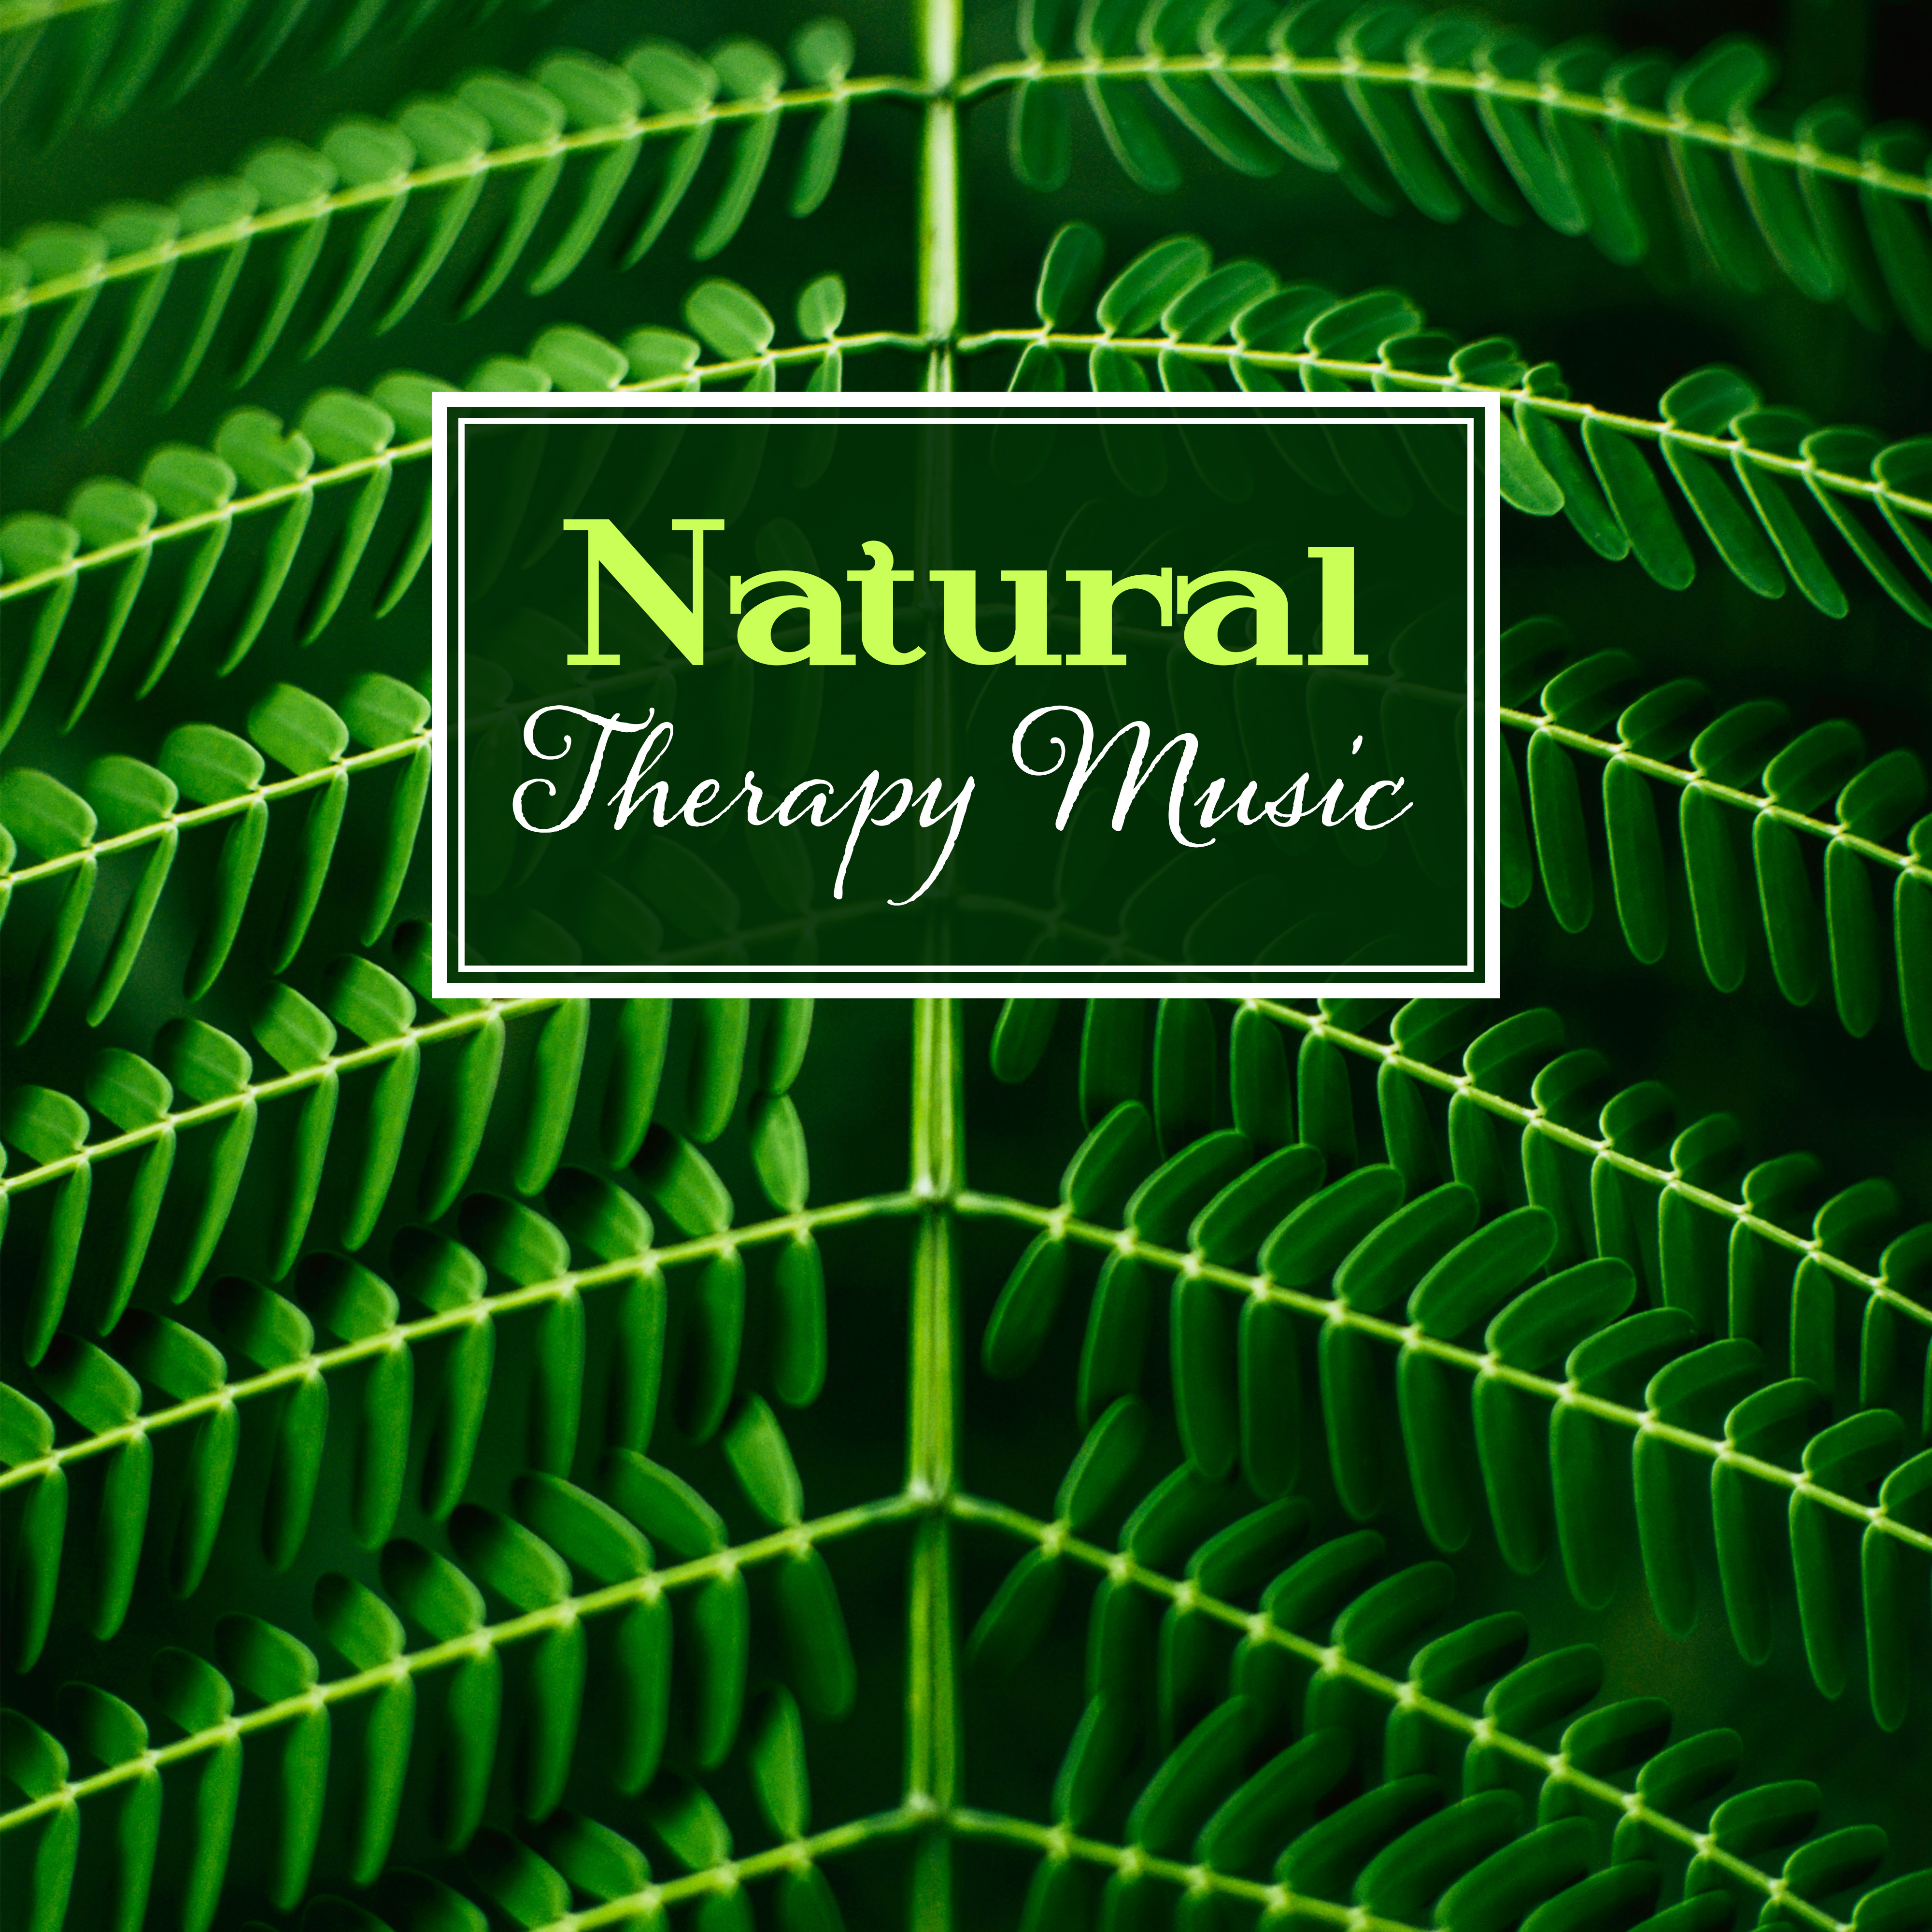 Natural Therapy Music – Calming Sounds of Nature, Relaxing Music, Bliss, Healing Nature Music, Zen, Rest, Anti – Depressant Music